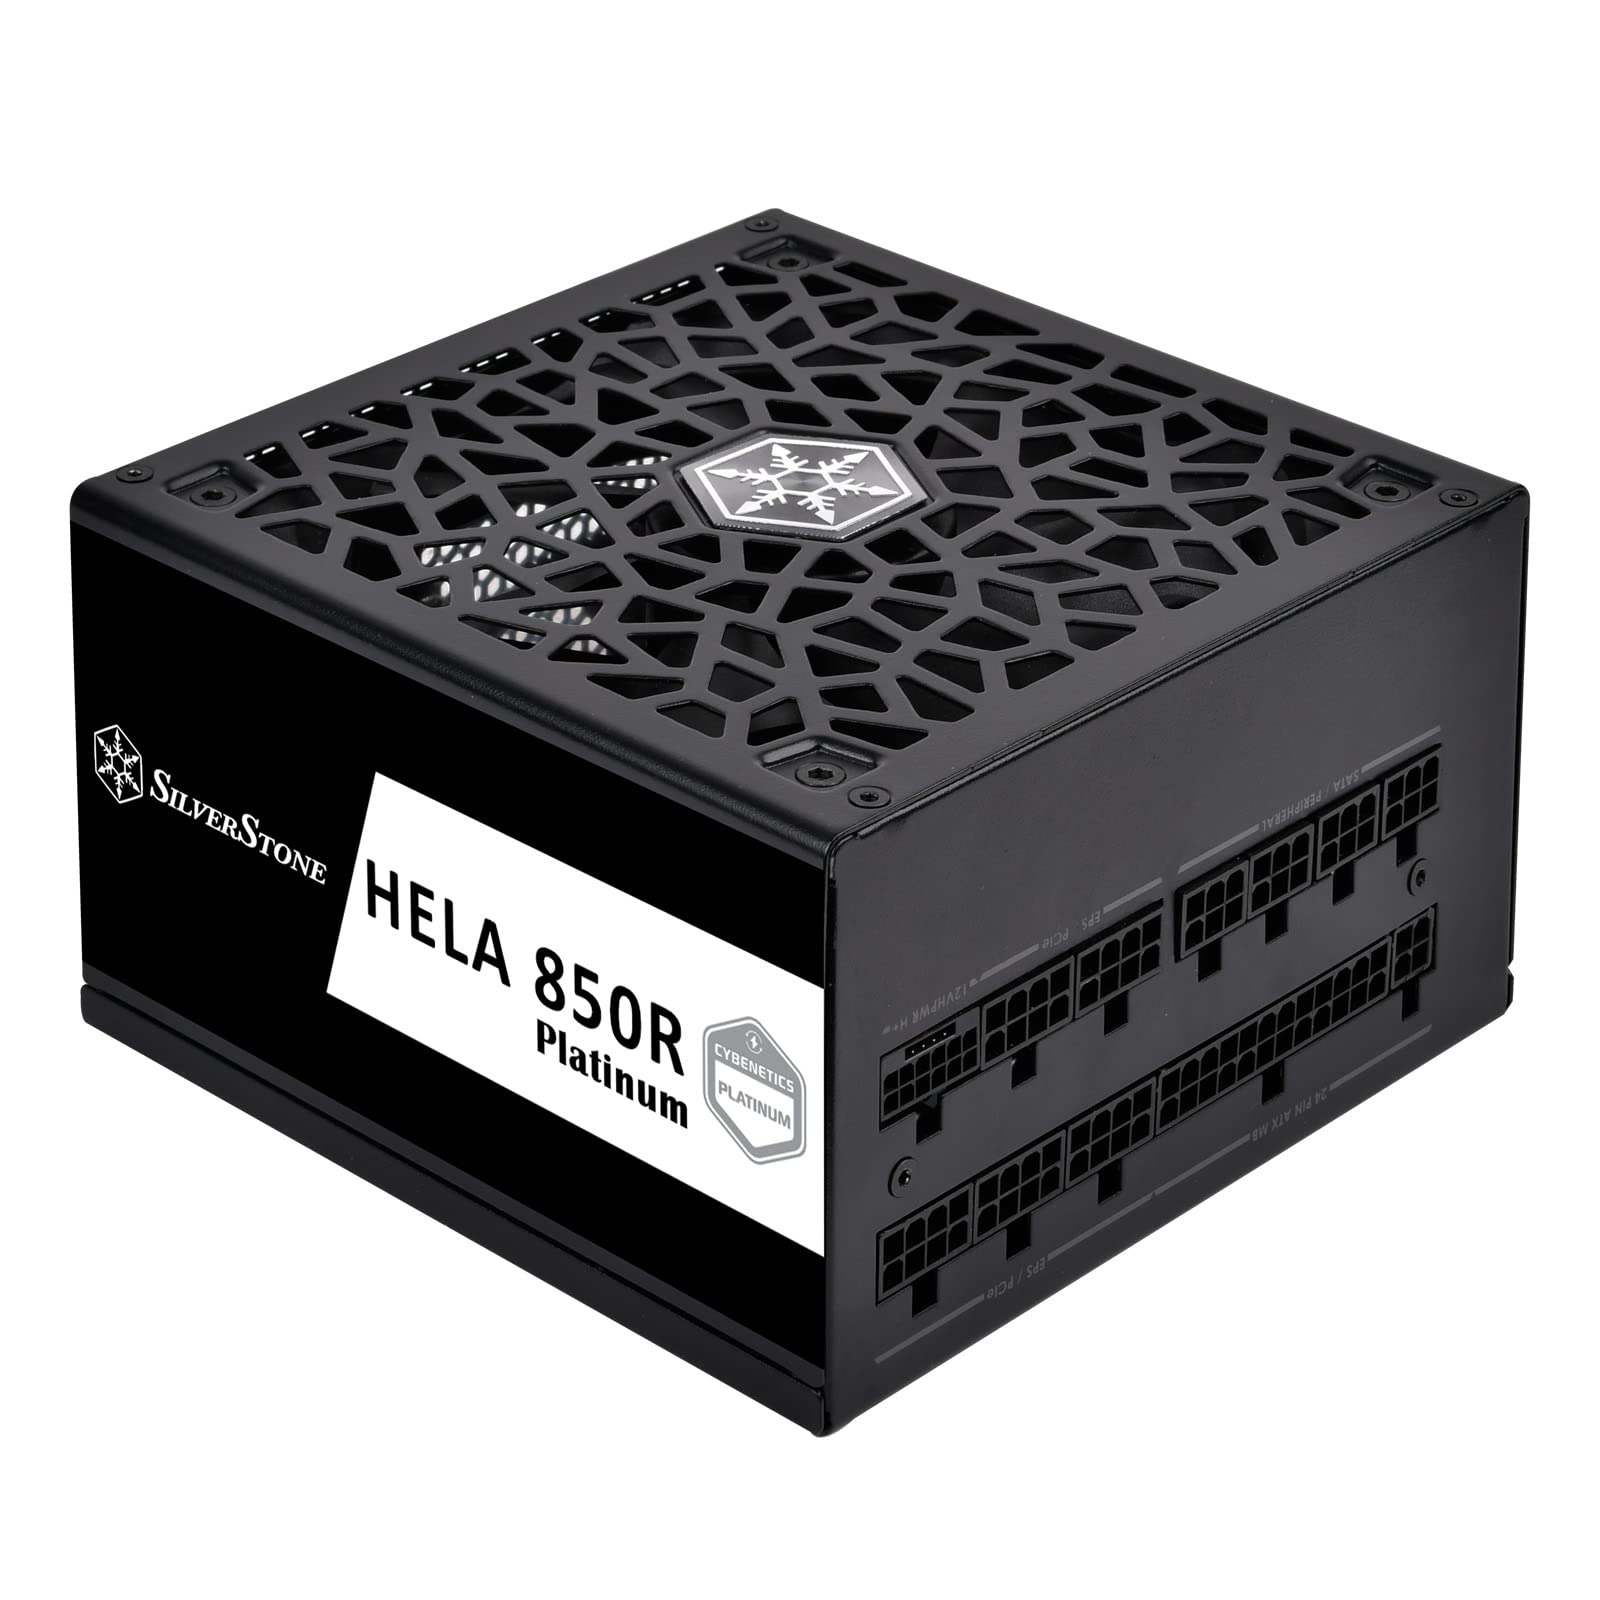 SilverStone Technology HELA 850R Platinum Cybenetics Platinum 850W PCIe 5.0 Fully Modular ATX 3.0 Power Supply with A+ Noise Rating (18dBA Average), SST-HA850R-PM